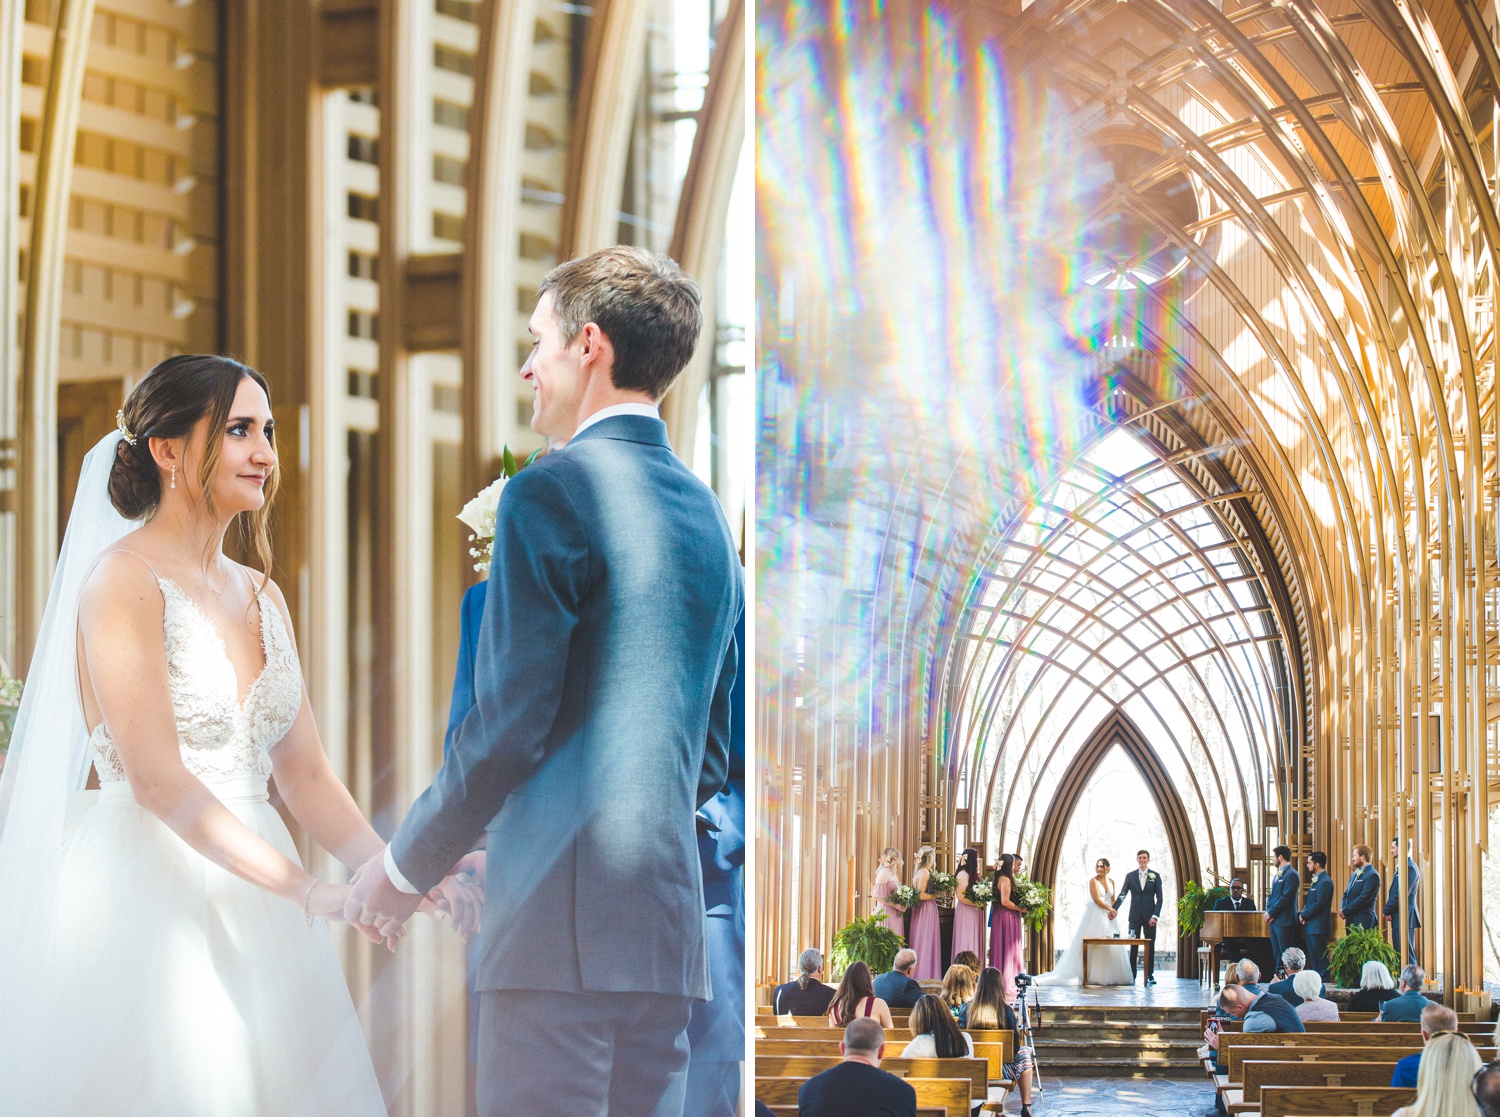 beautiful wedding photographs at Cooper Chapel, photos taken with prism